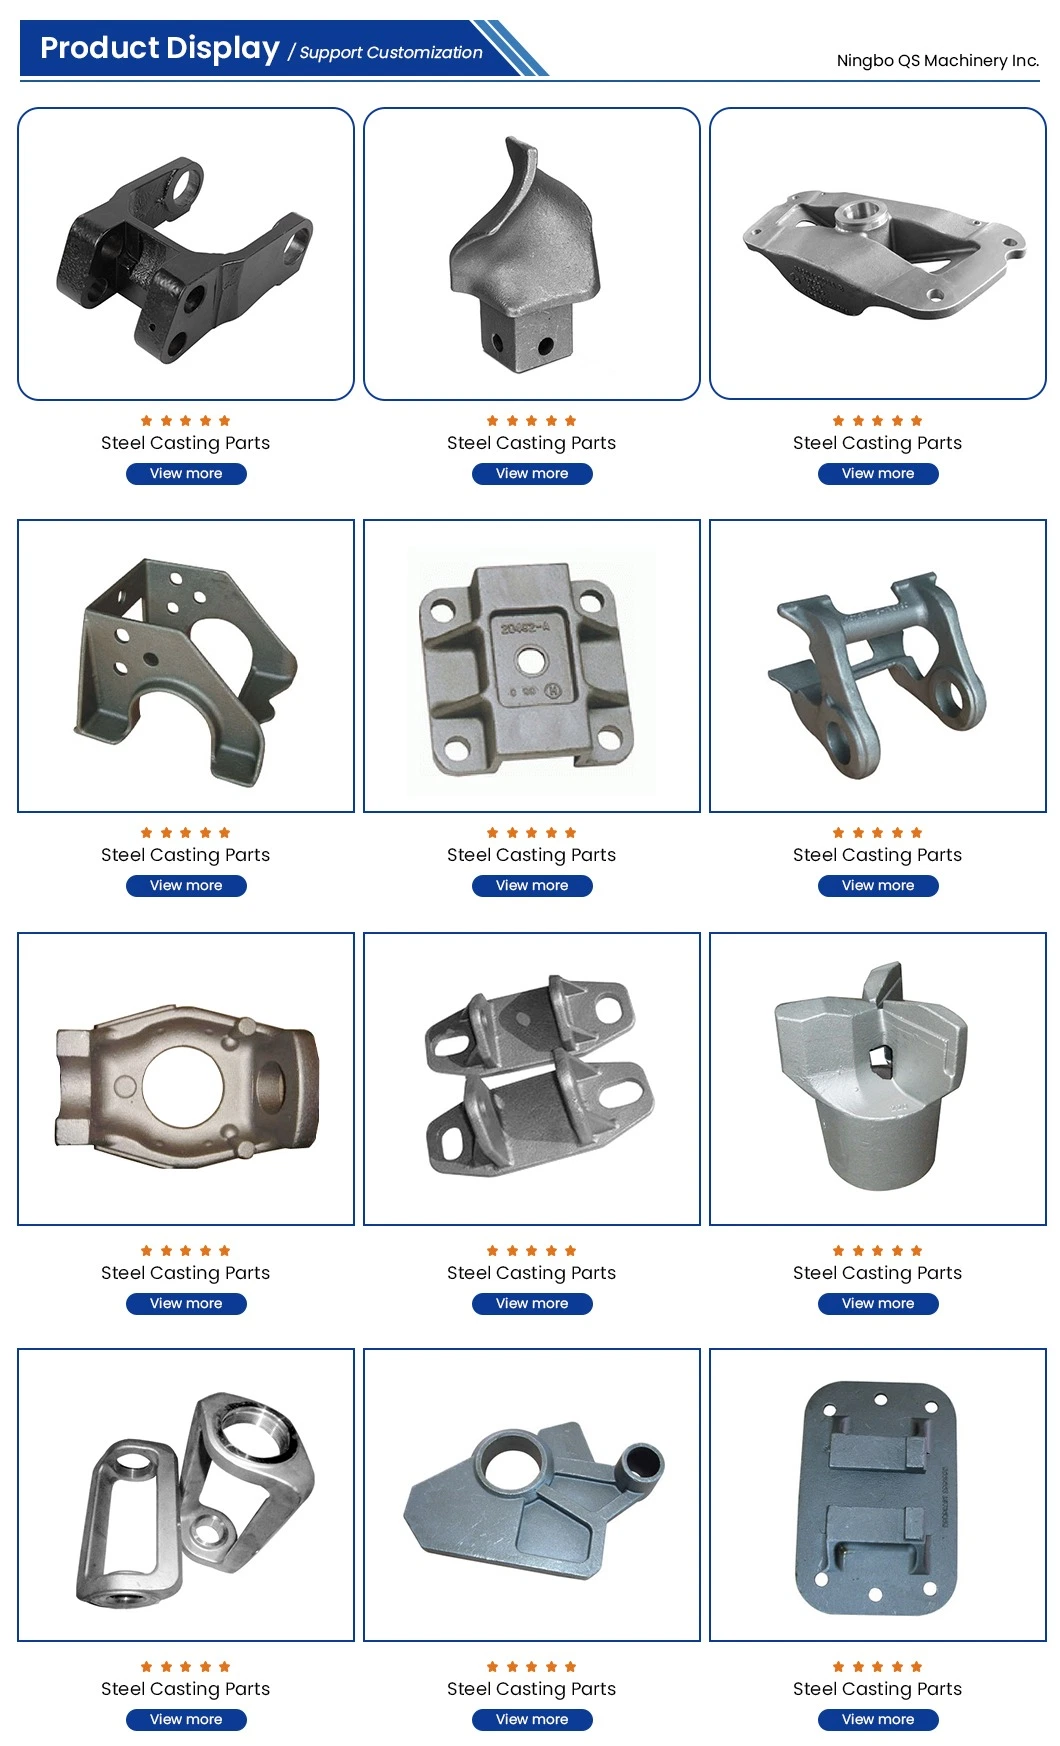 QS Machinery Cast Metals Inc Customized Stainless Steel Sand Casting Services China Micro Casting Parts Steel for Farm Machinery Parts